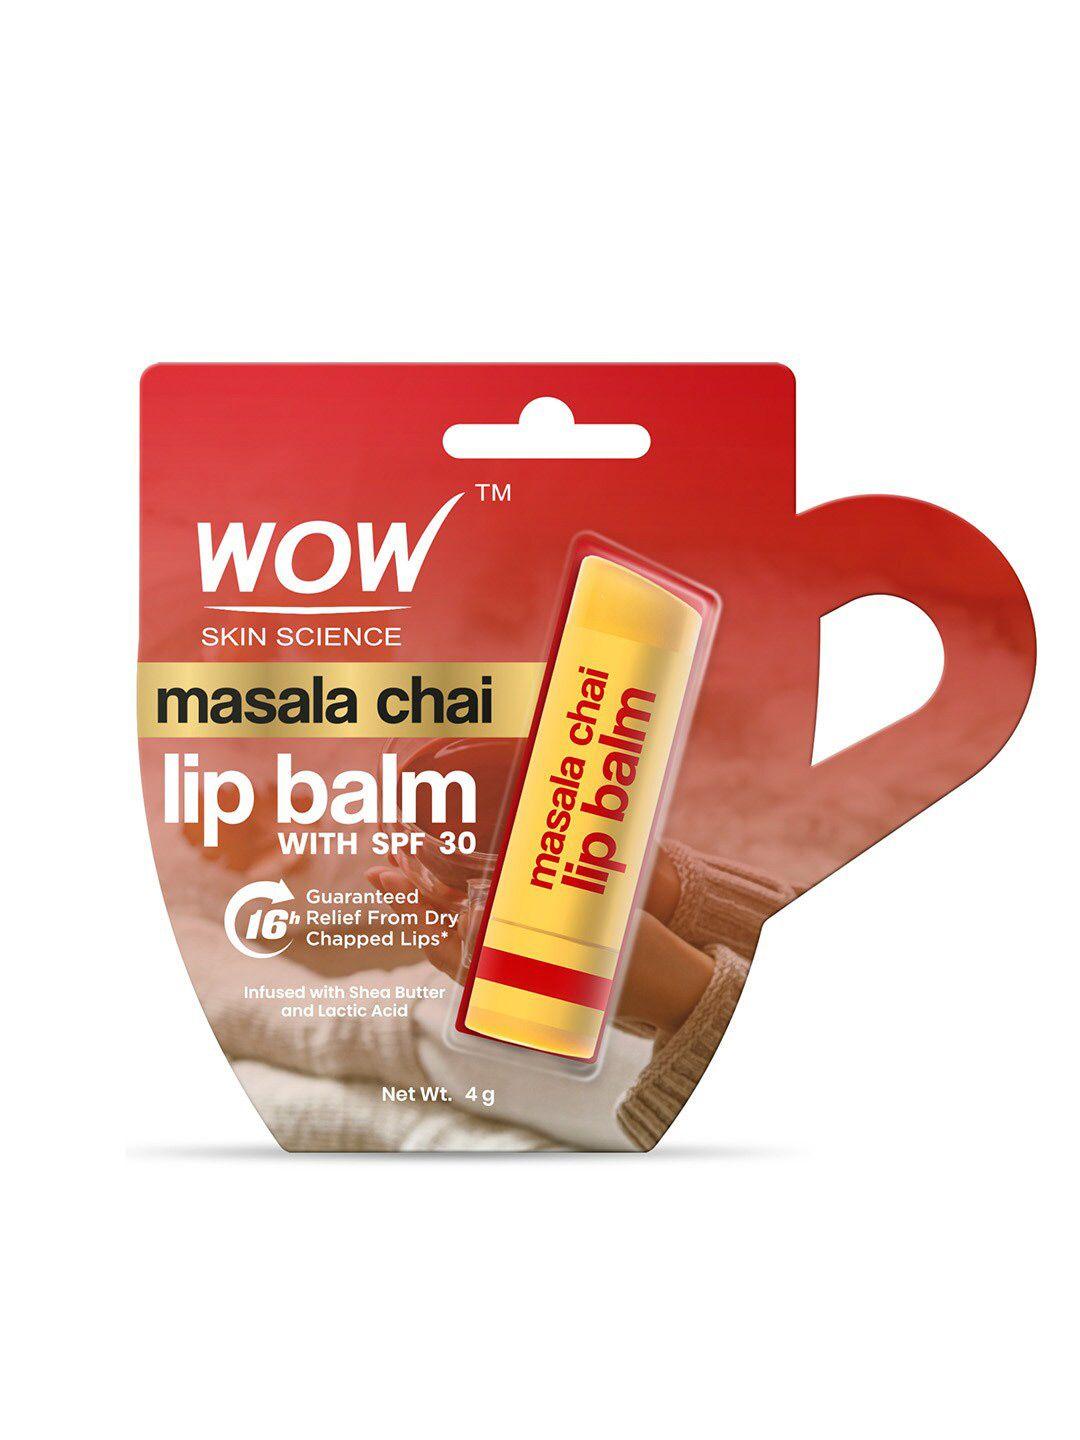 wow skin science masala chai lip balm with shea butter & lactic acid 4 g - red